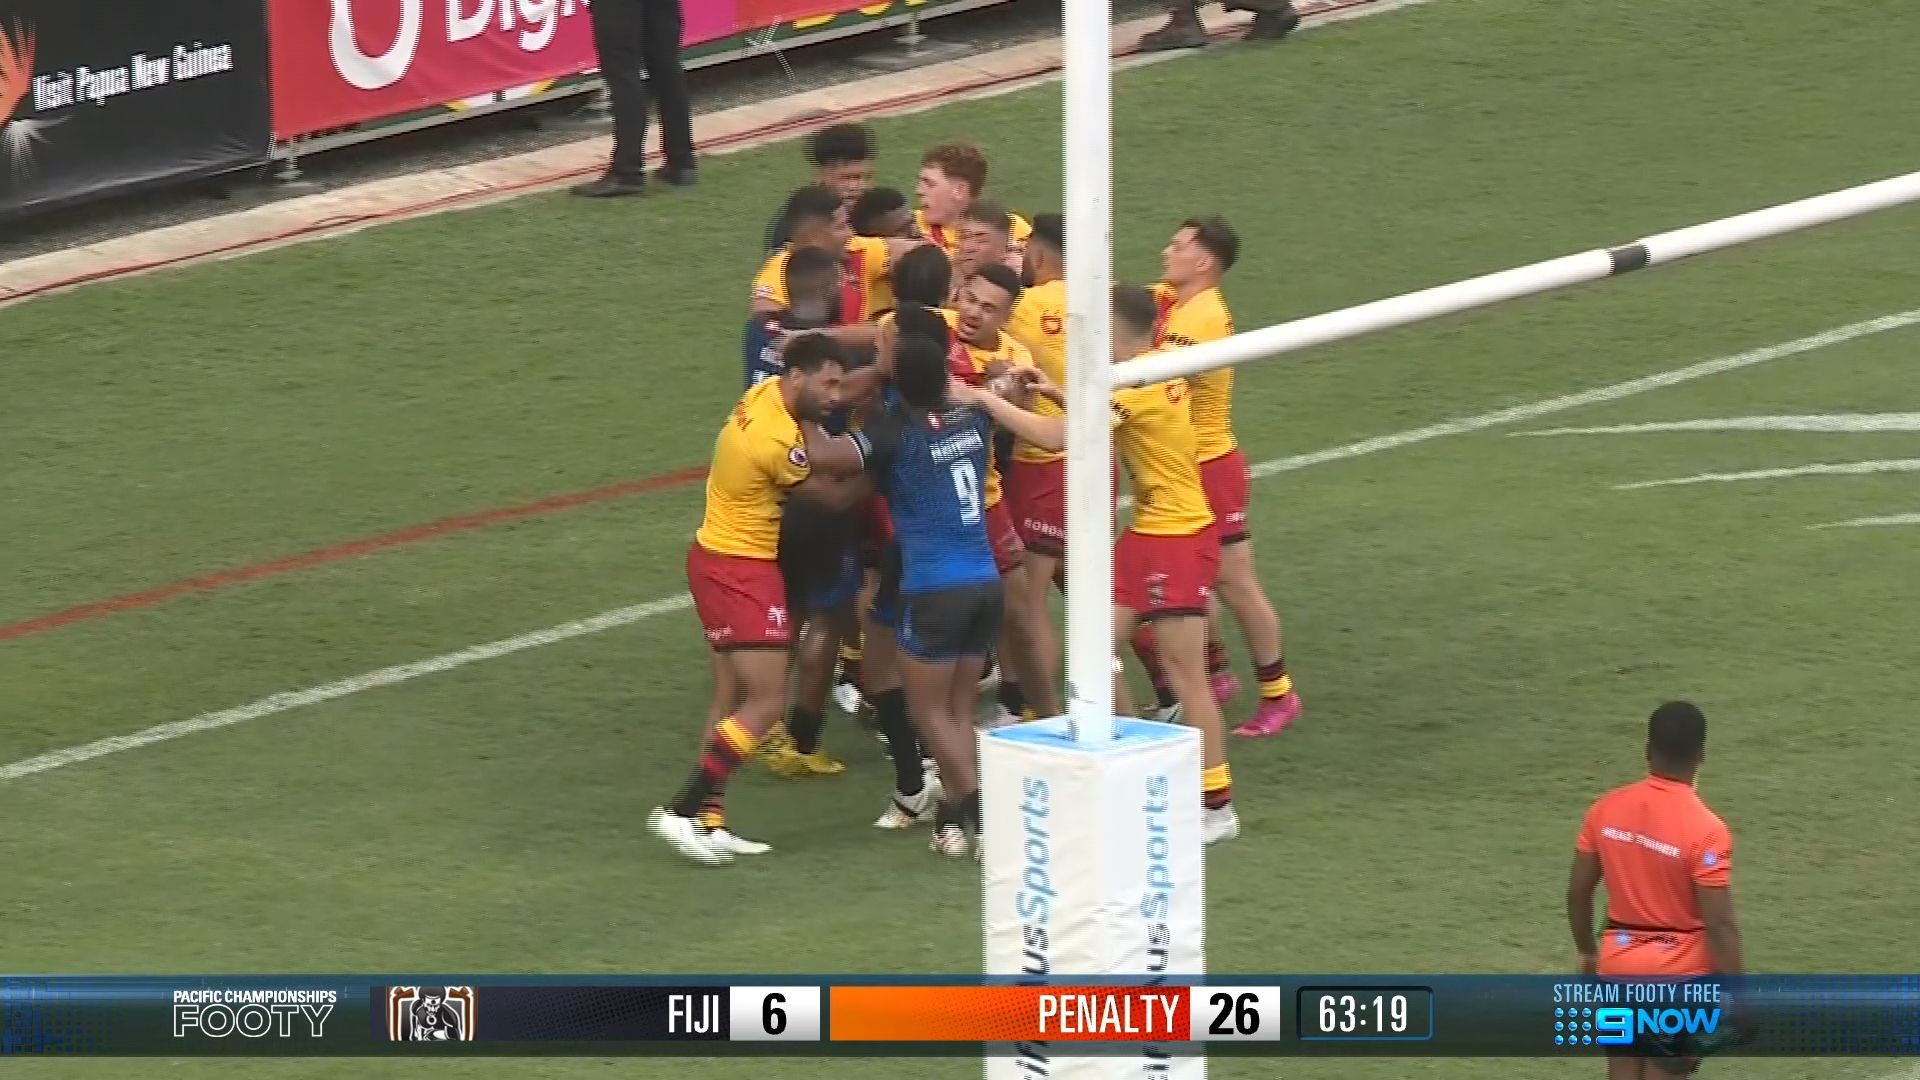 Kumuls claim Pacific Bowl Championship as 'nasty' melee erupts with Bati